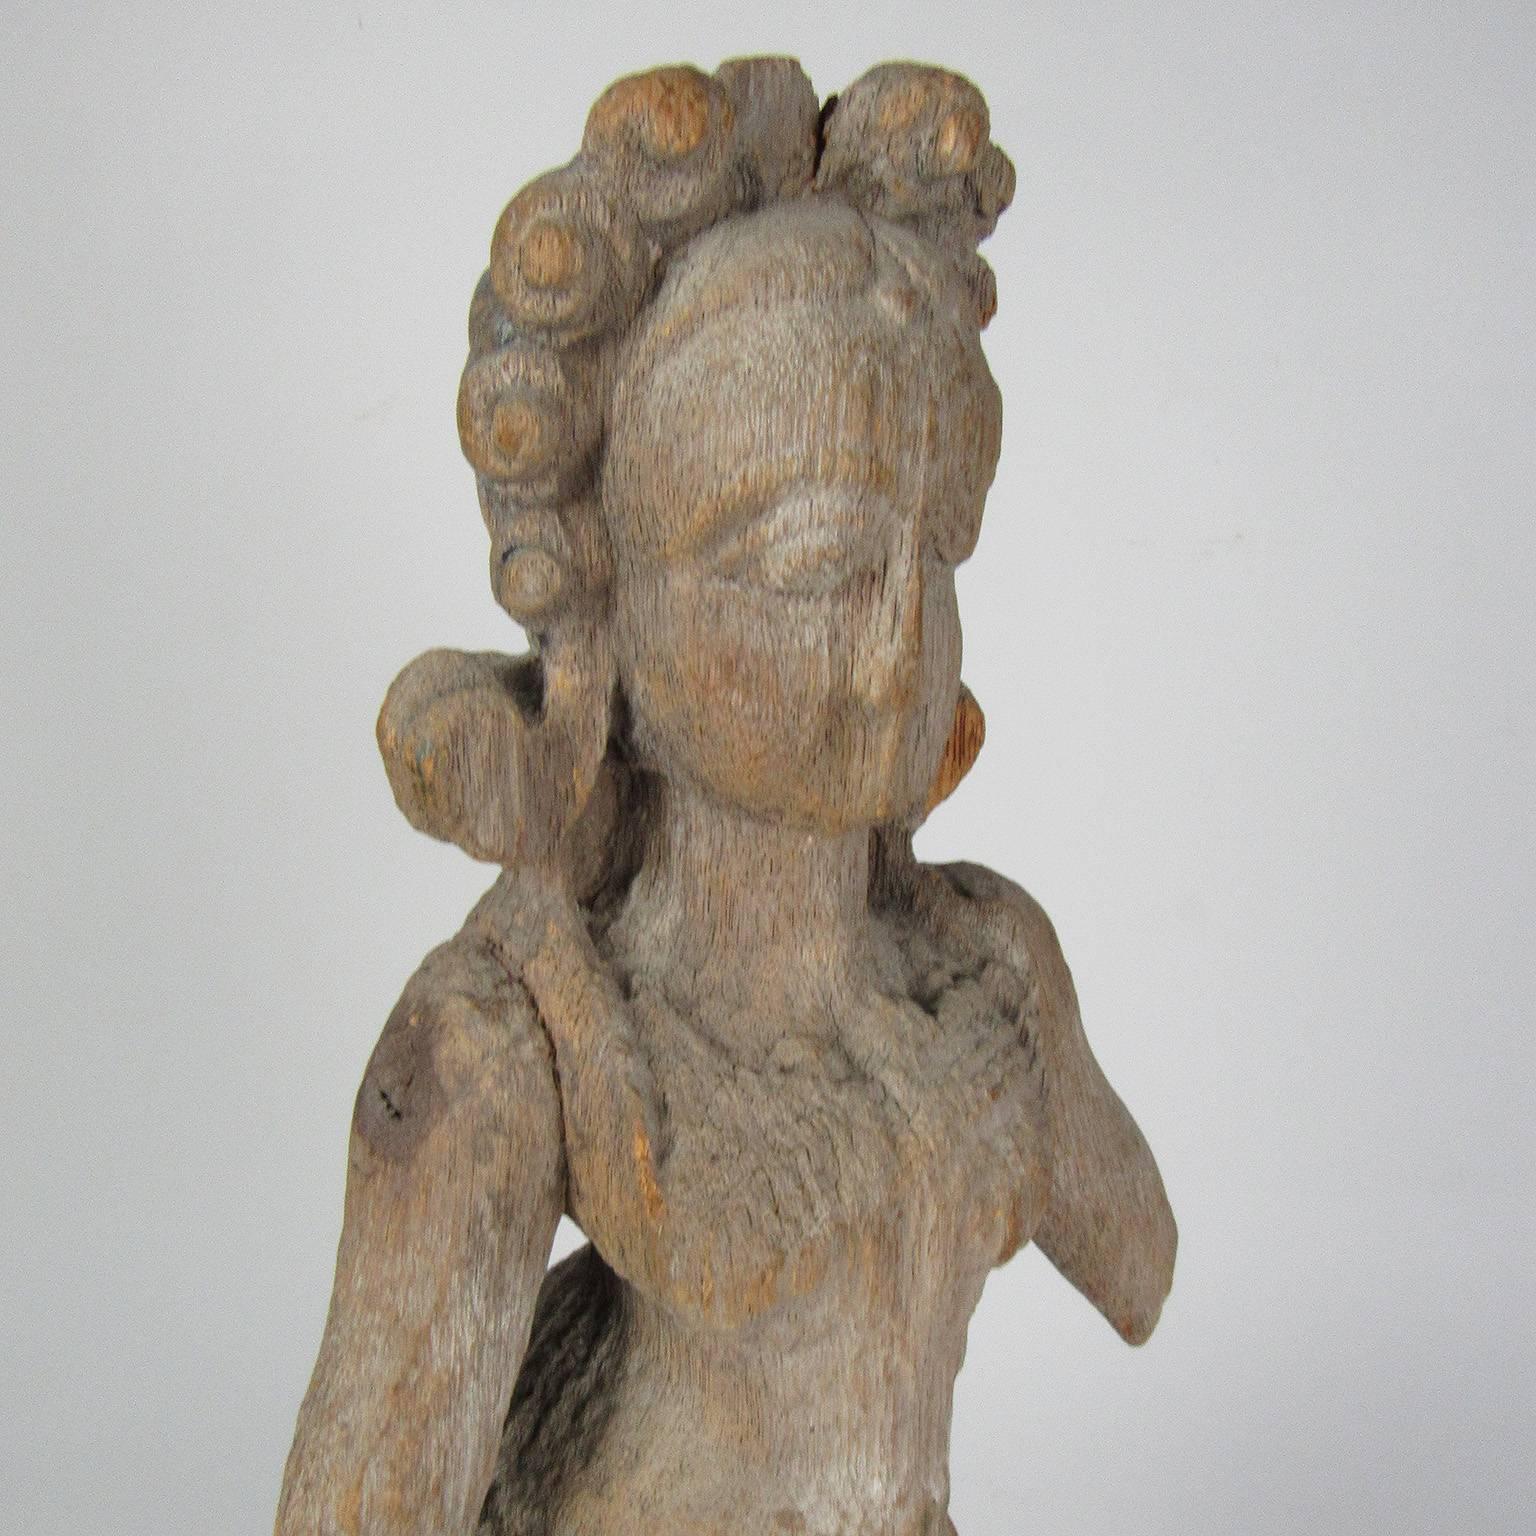 Nepalese 17th-18th Century Carved Wood Figure of a Female Hindu Deity